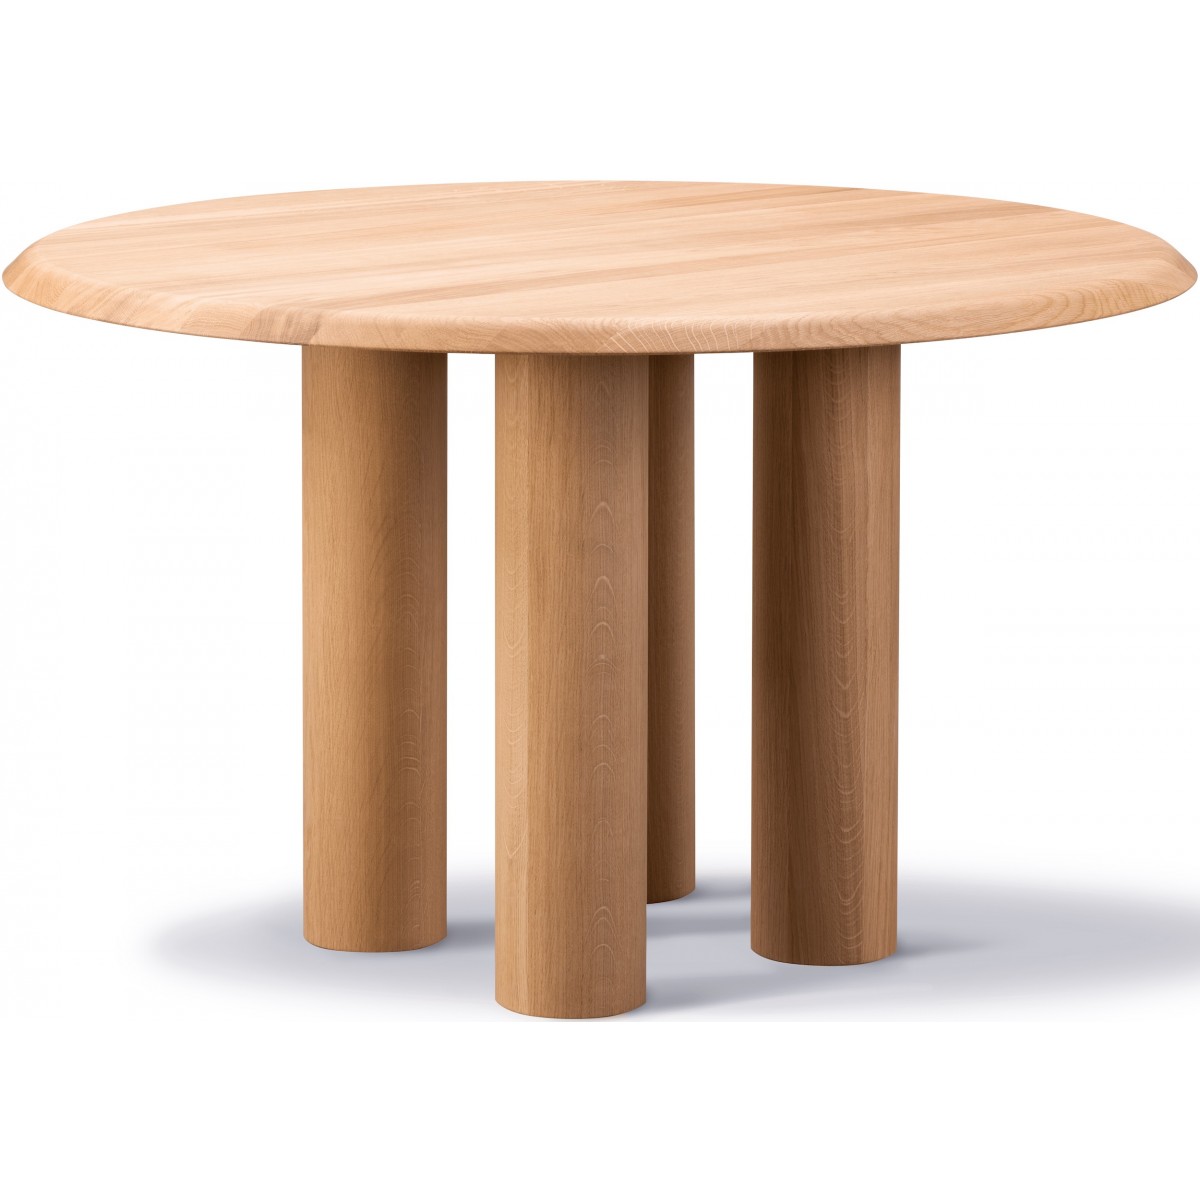 Table Islets 6775